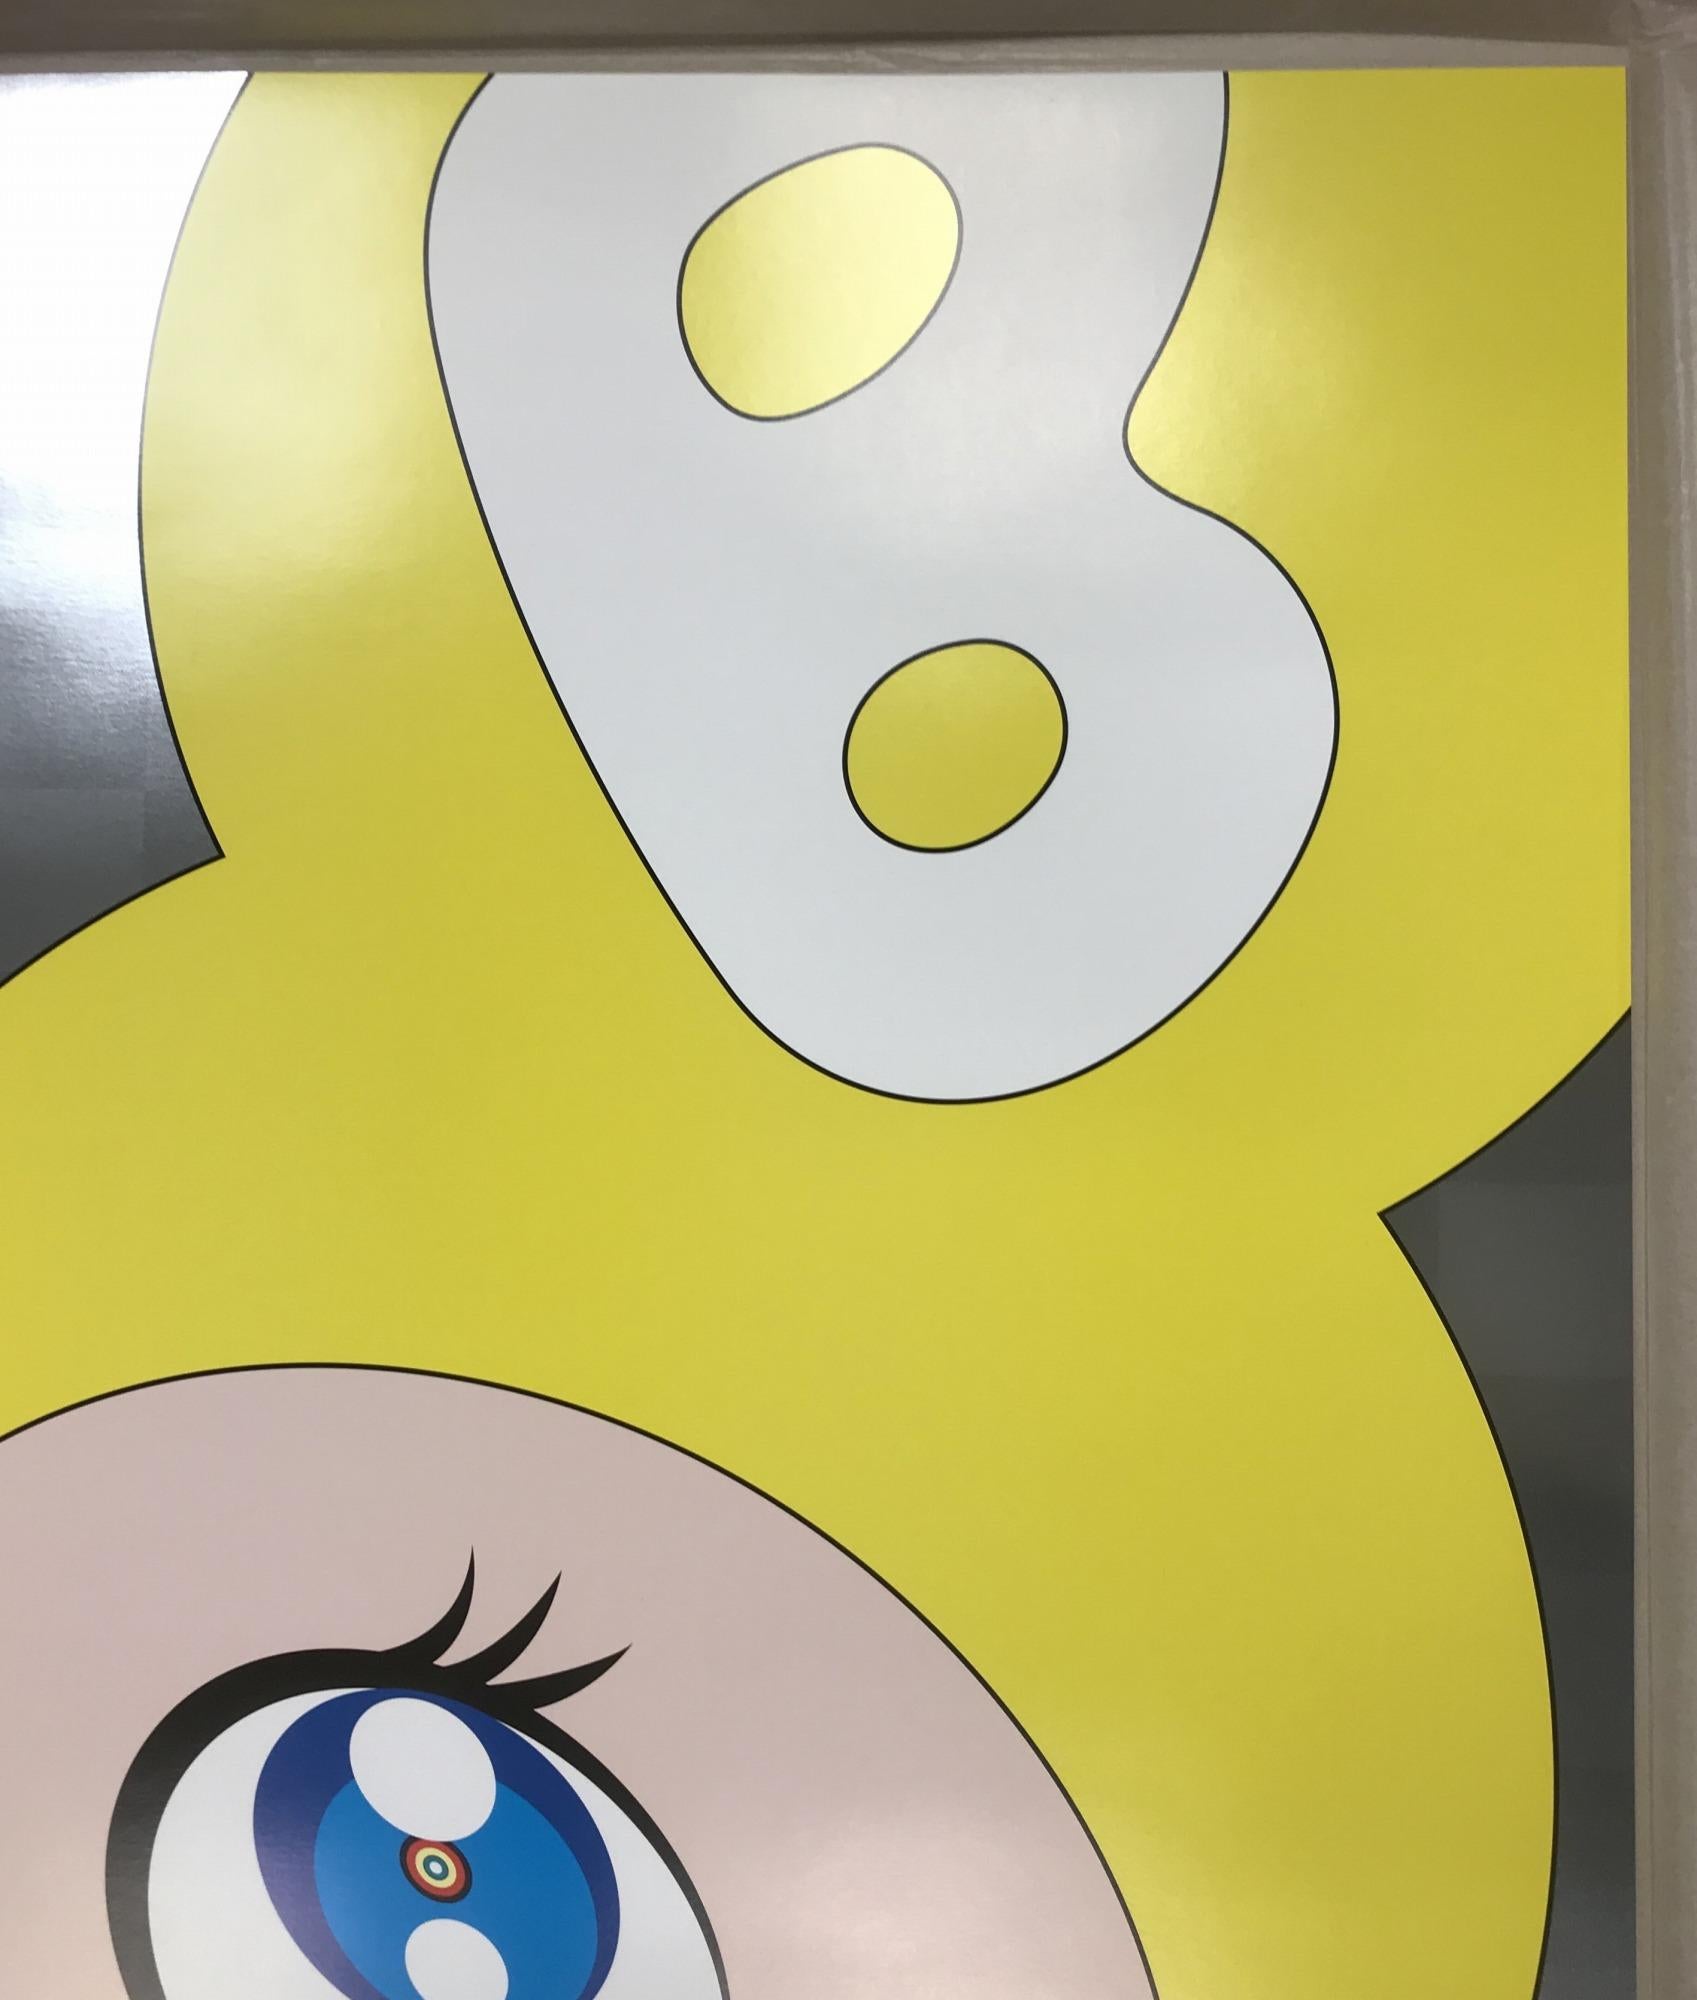 And Then and then and then and then and then (Yellow), 1999 by Takashi Murakami
Offset print, in silver ink signed and numbered by the artist
26 4/5 × 26 4/5 in
68 × 68 cm
Edition 135/300

The design for Mr. DOB was inspired by several animated